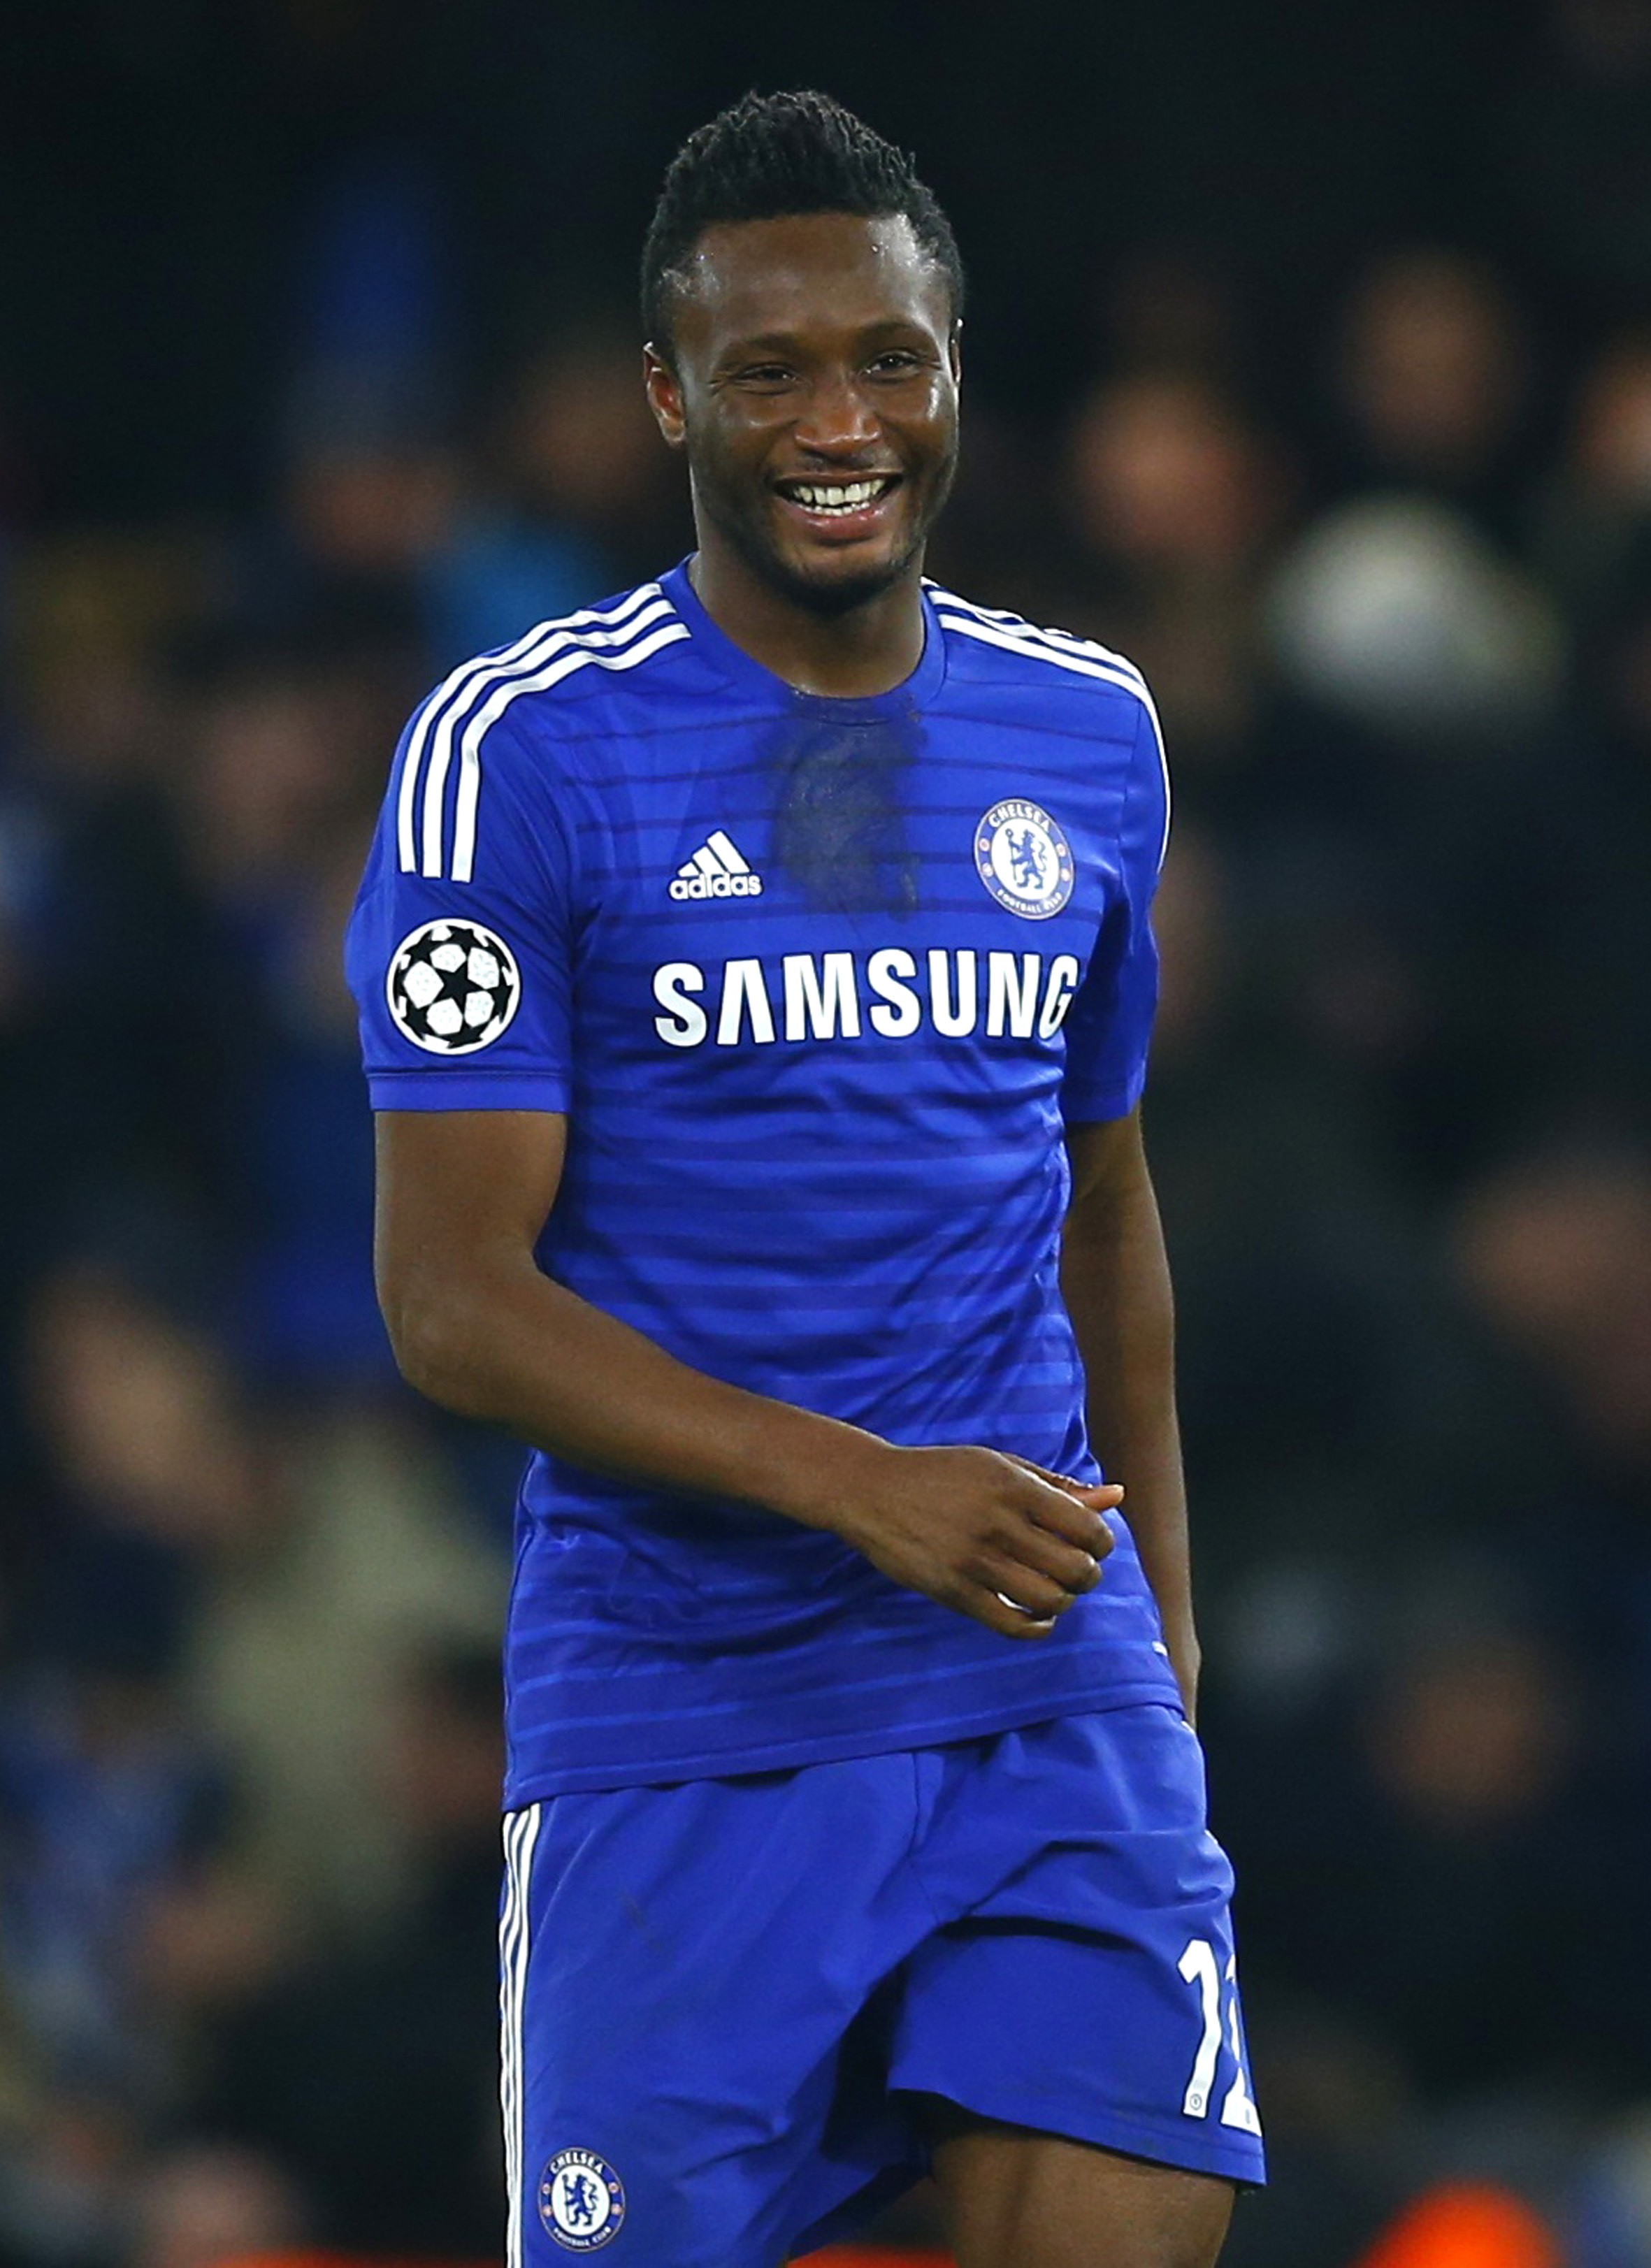 Chelsea's John Obi Mikel smiles after scoring a goal against Sporting during their Champions League soccer match in London